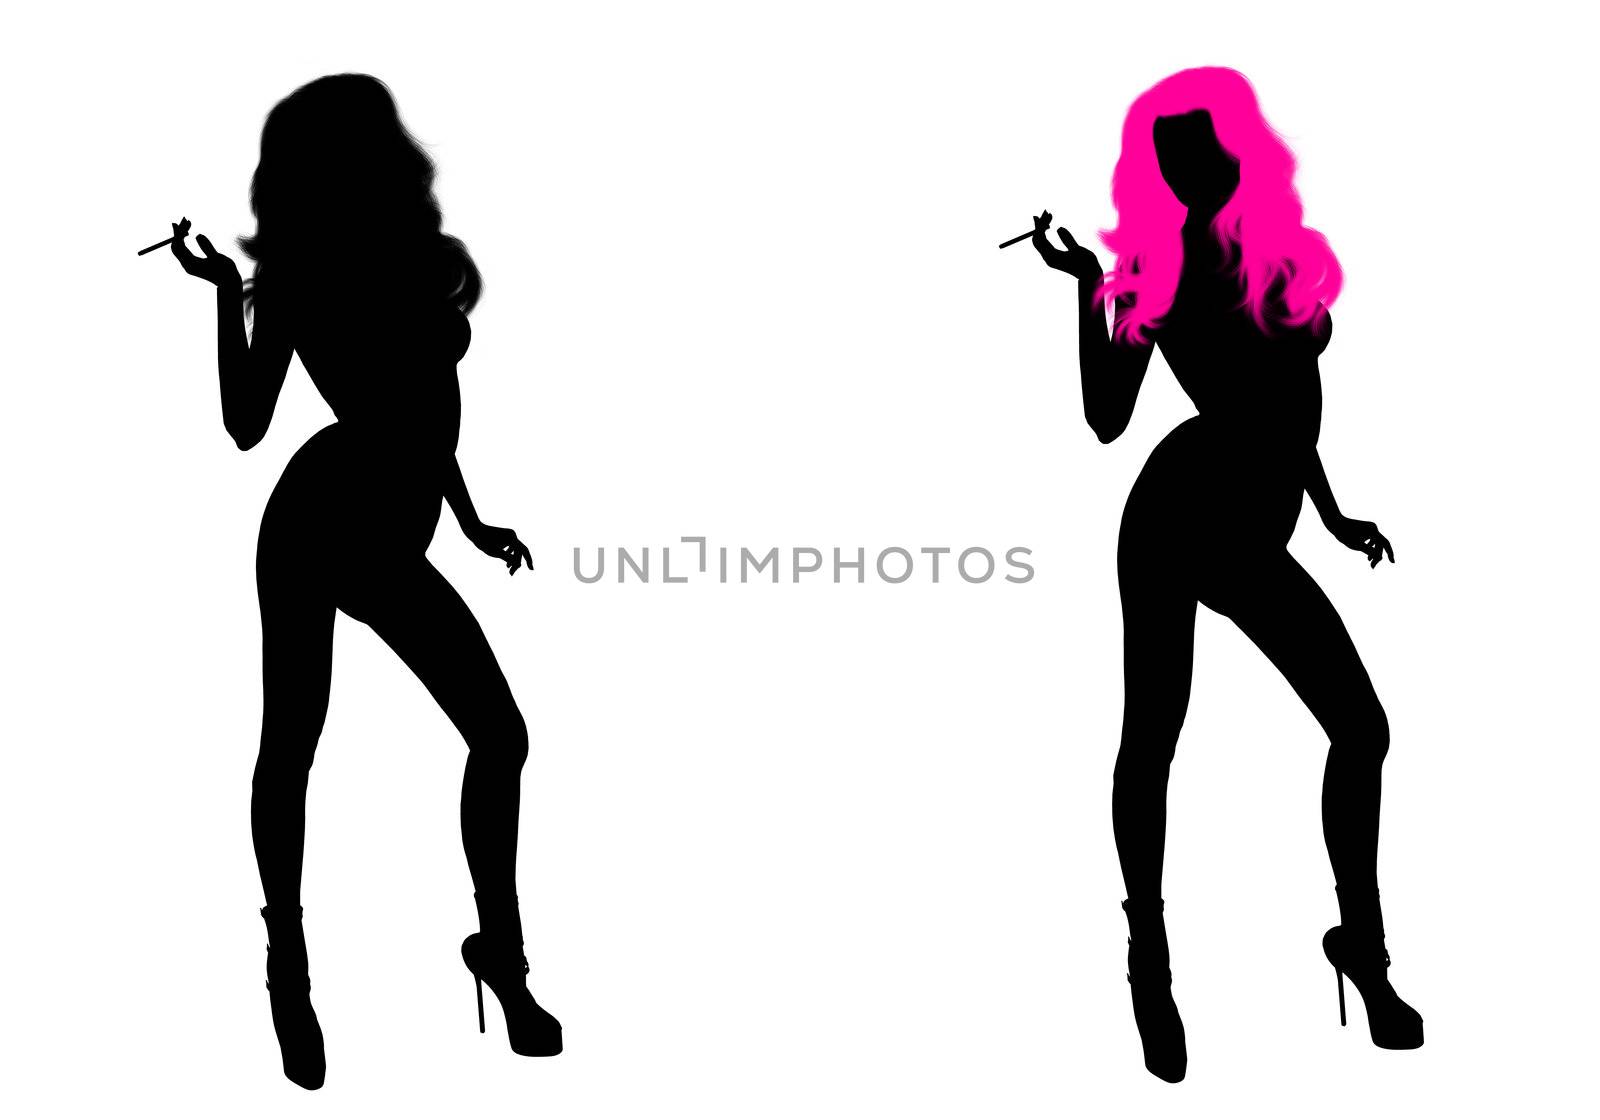 One woman silhouette with pink hair and one woman without